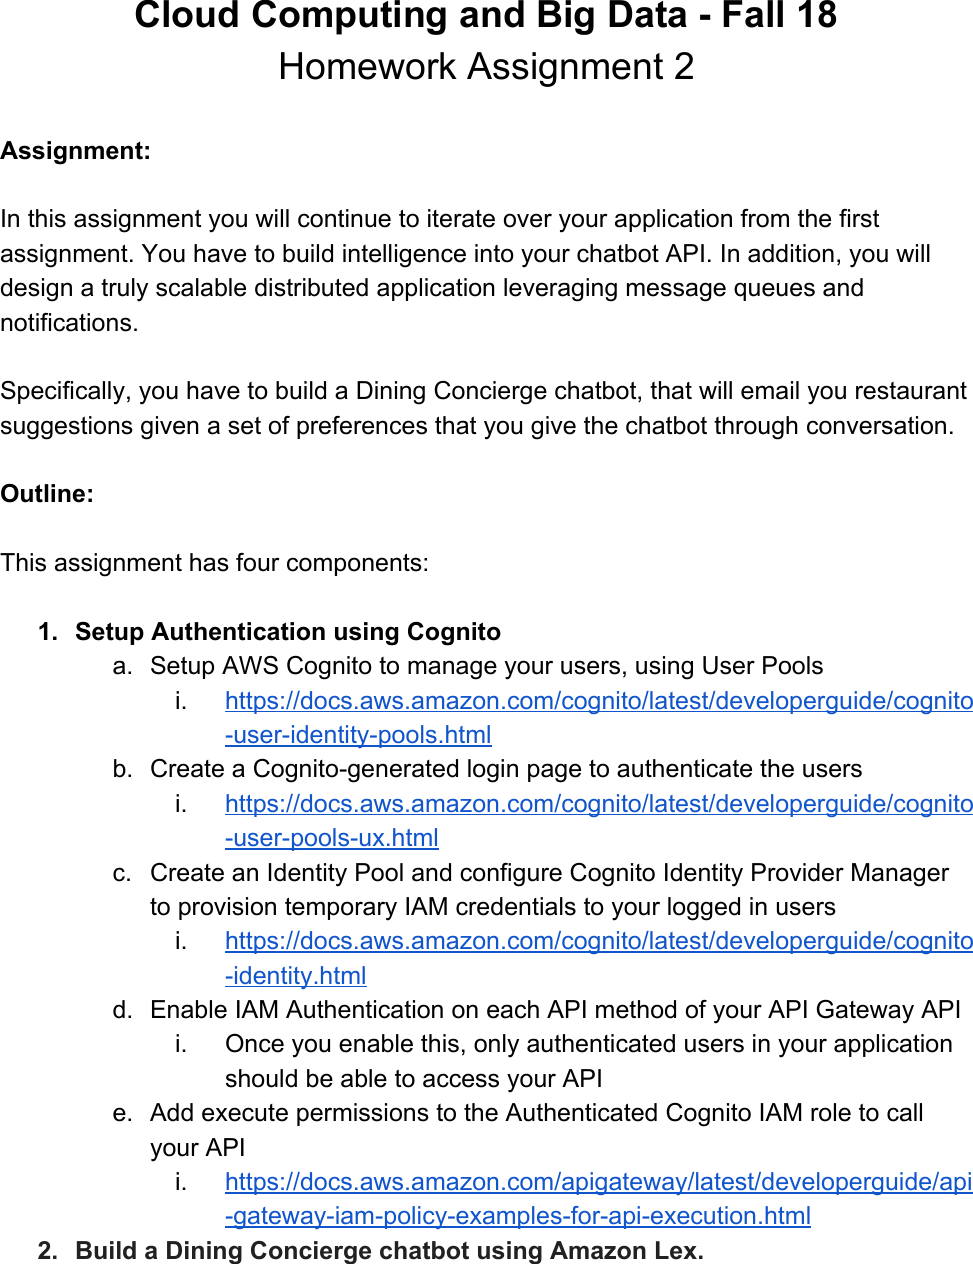 Page 1 of 5 - AWS-Cloud-Dining-Concierge-Chatbot-Part2-Instructions